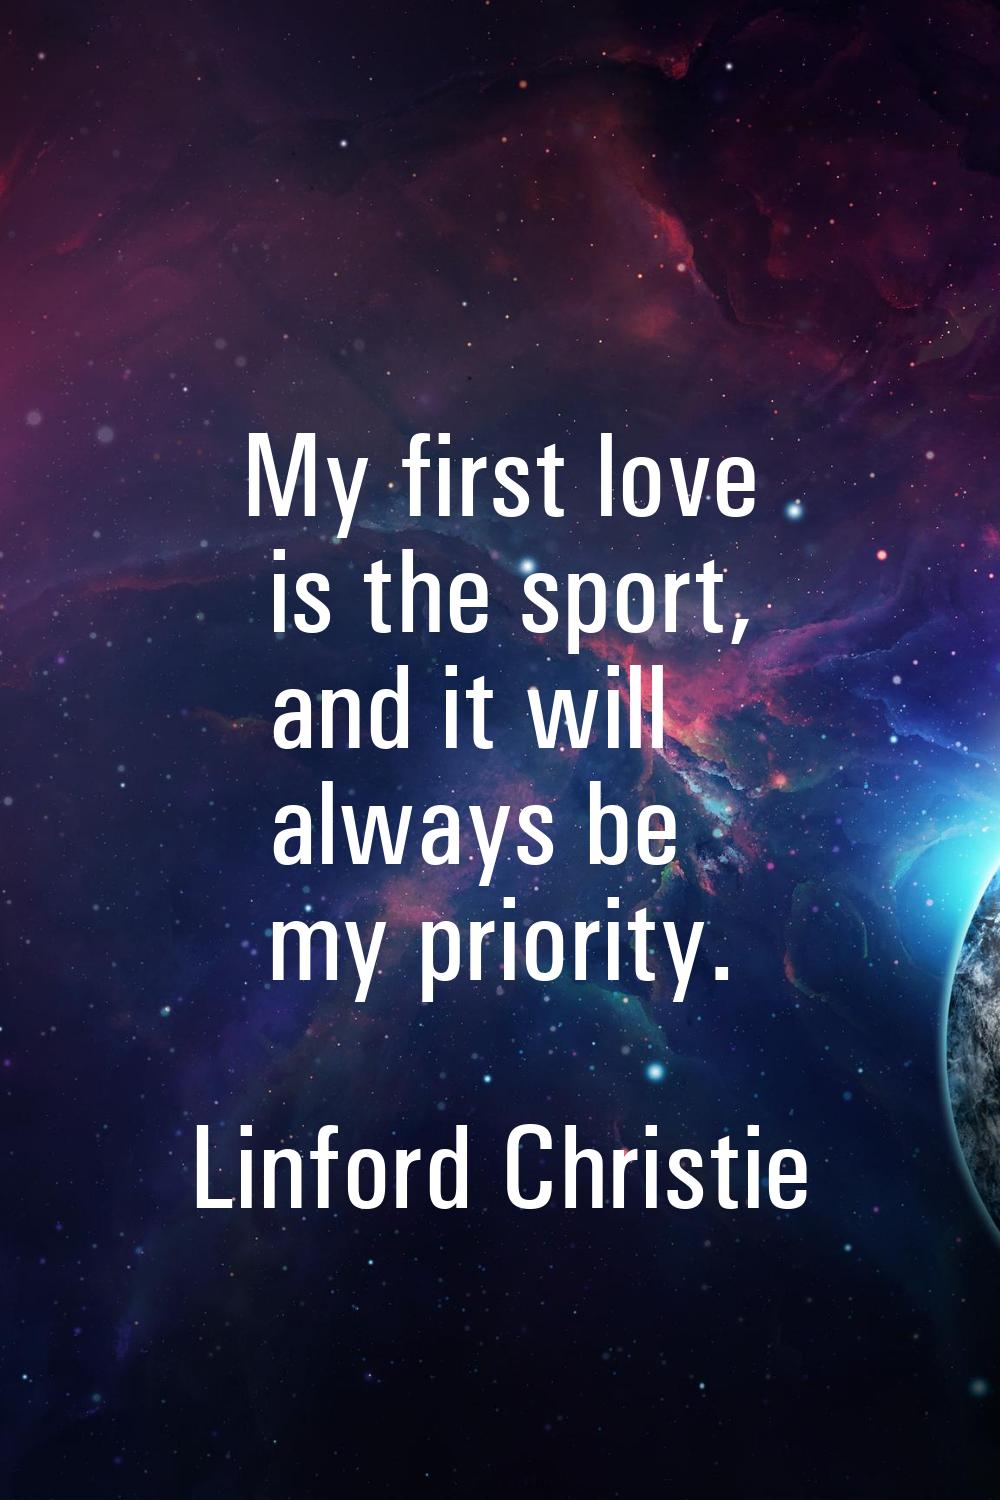 My first love is the sport, and it will always be my priority.